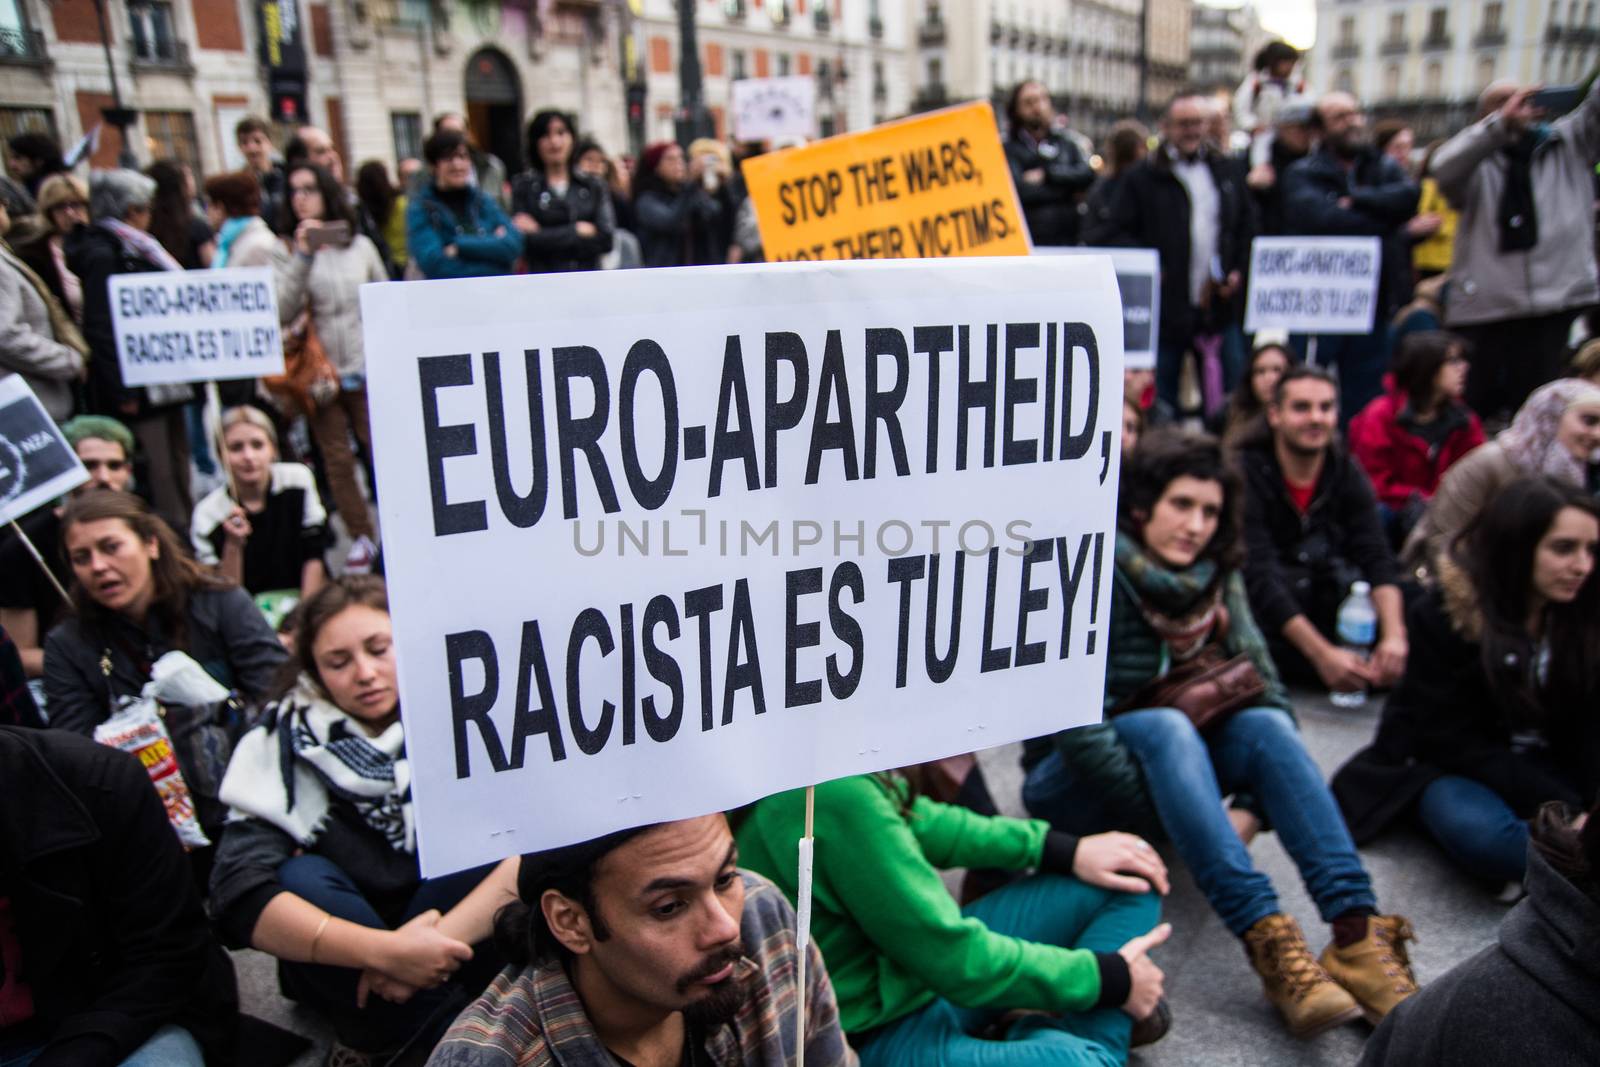 SPAIN, Madrid: A protester holds a sign which reads Euro-Apartheid, racista es tu ley! during a rally at Sol Square in Madrid, Spain on April 22, 2015 to protest against EU-Turkey agreement and to show support to refugees for a 24 hours vigil.